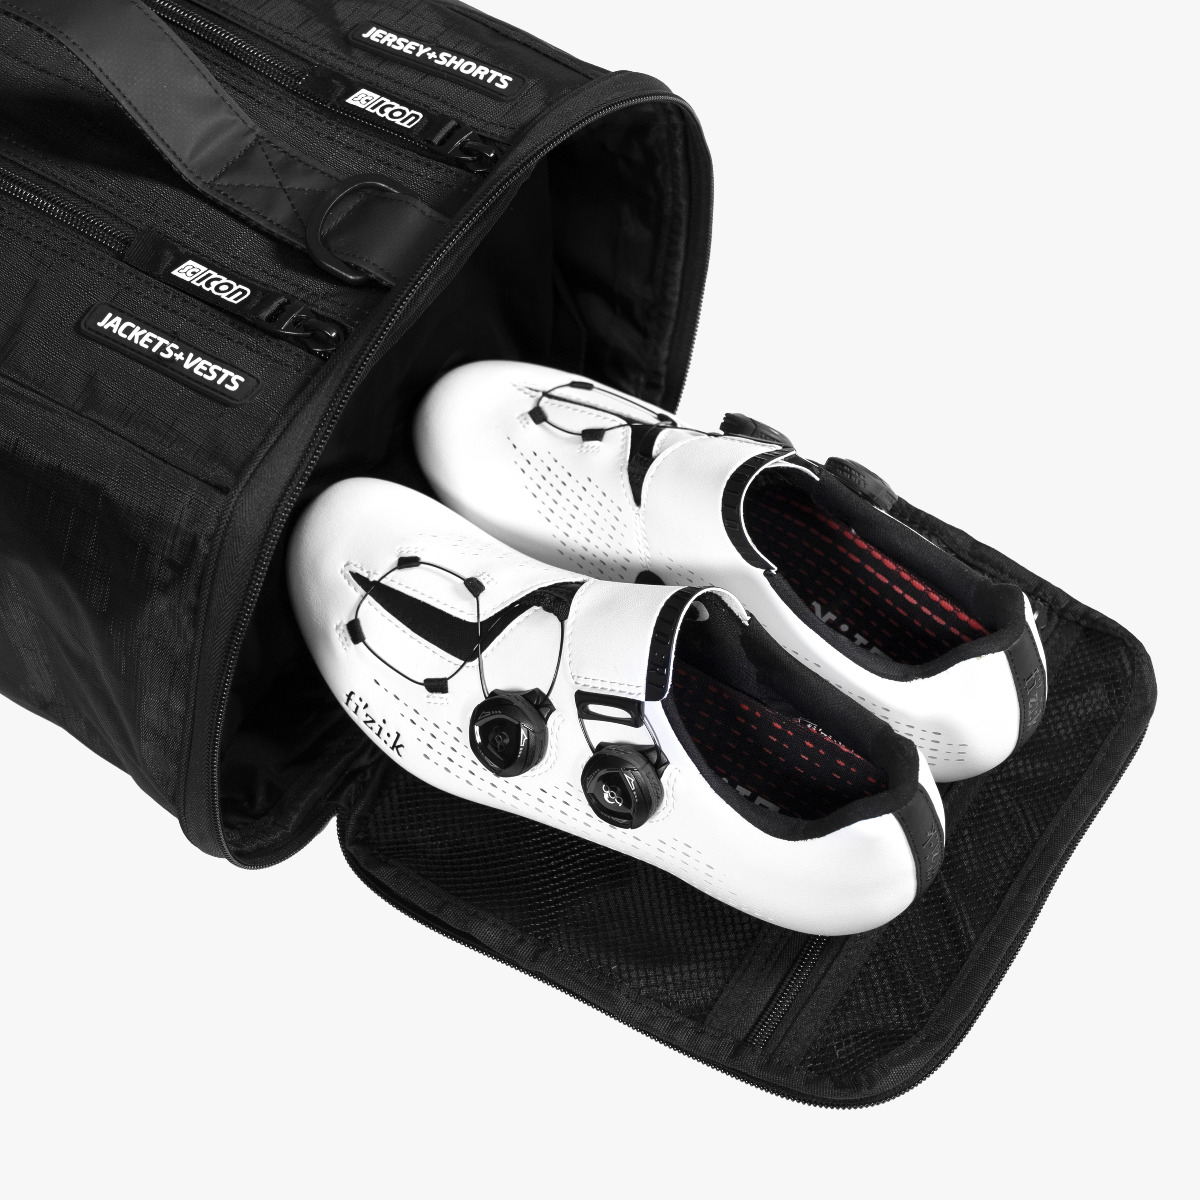 Scicon Sports | Essentials Cycling Kit Race Day Rain Bag - Black 